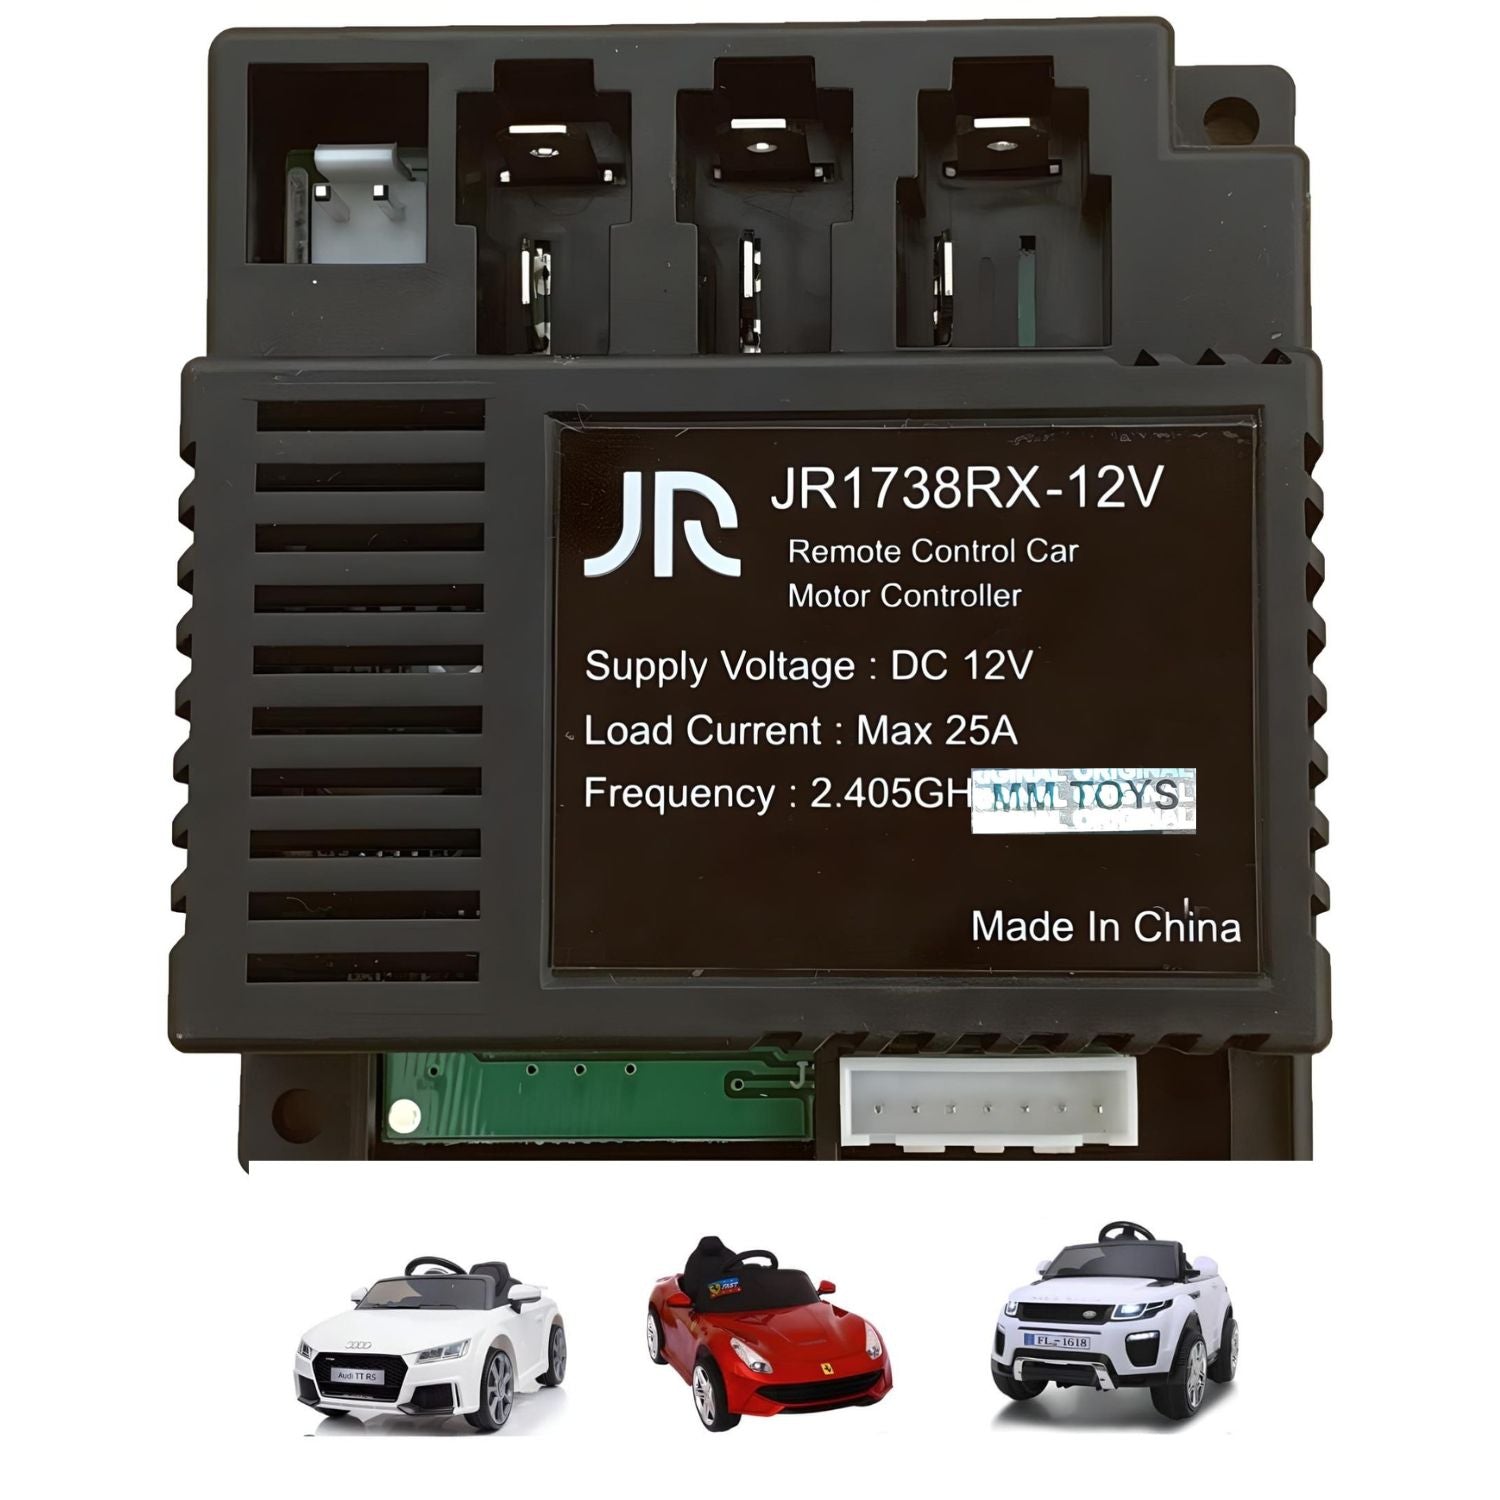 MM TOYS JR1738RX-12V Motor Controller Control Box 7 Pin White Jack, For Kids Electric Car, 2.4GHz, Max 25A Load,  Black - Electronic Repair Part and Accessory